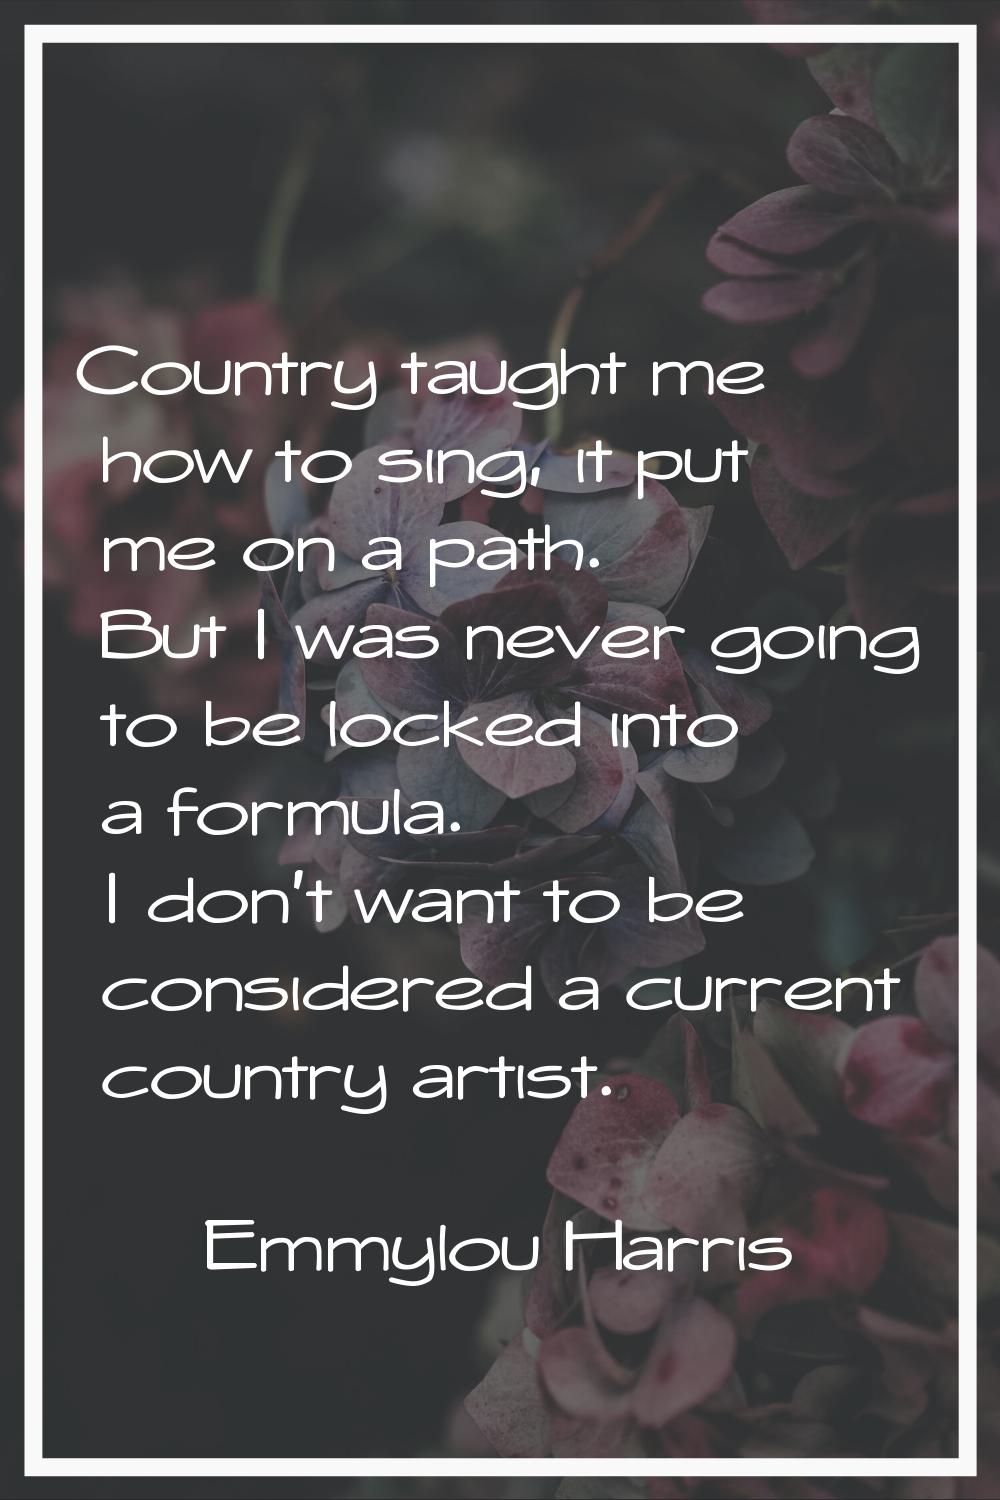 Country taught me how to sing, it put me on a path. But I was never going to be locked into a formu